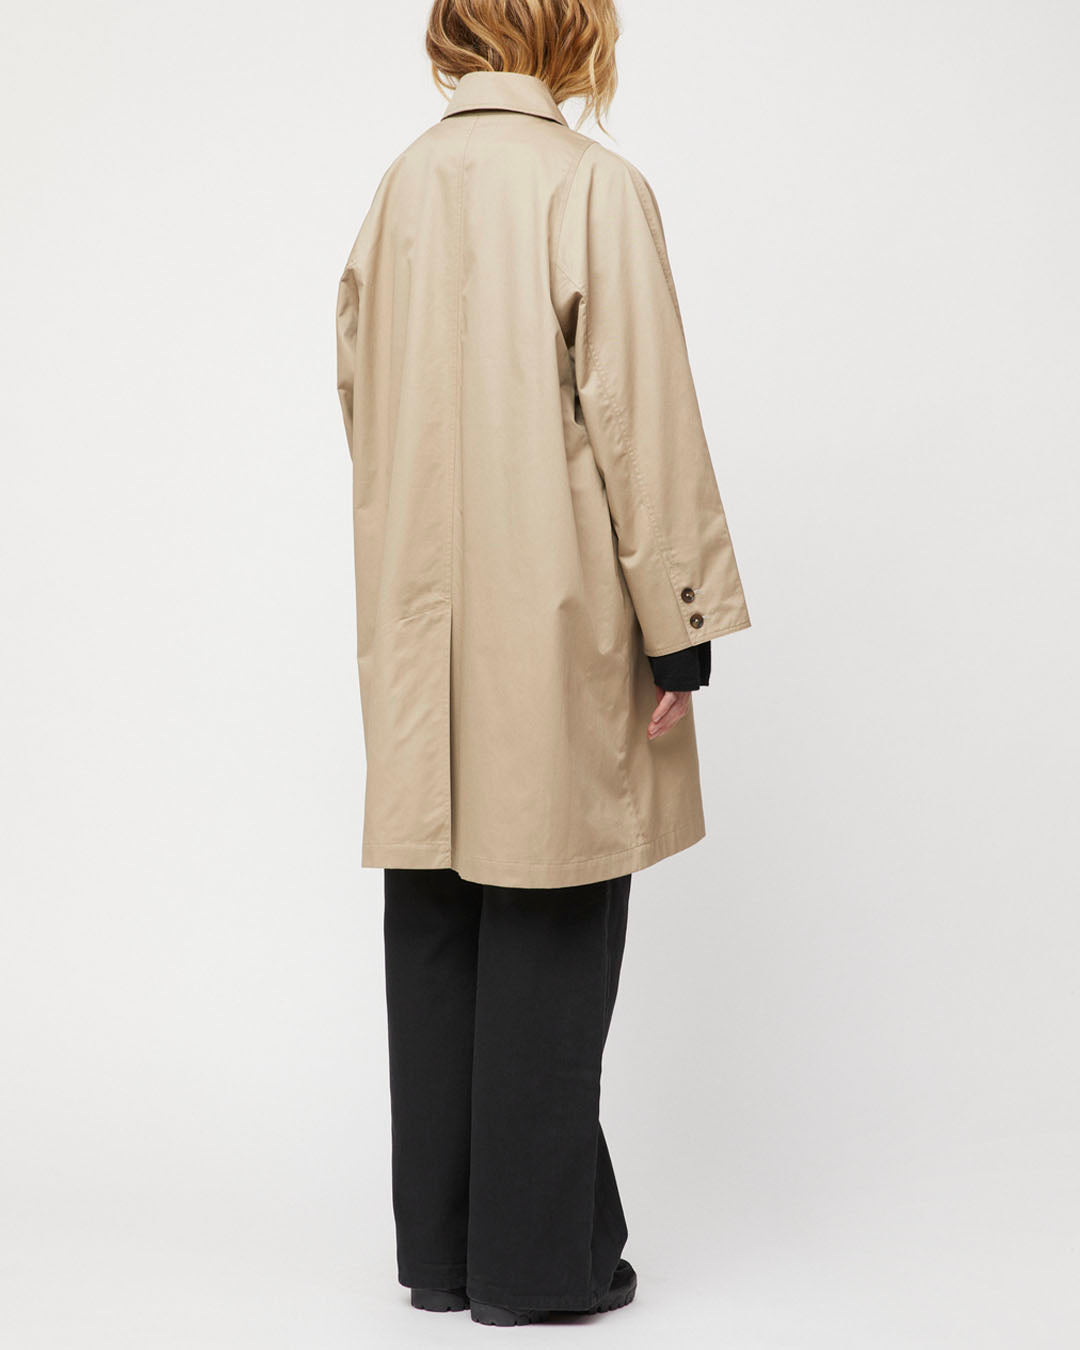 FWSS Anchorage Trench Coat